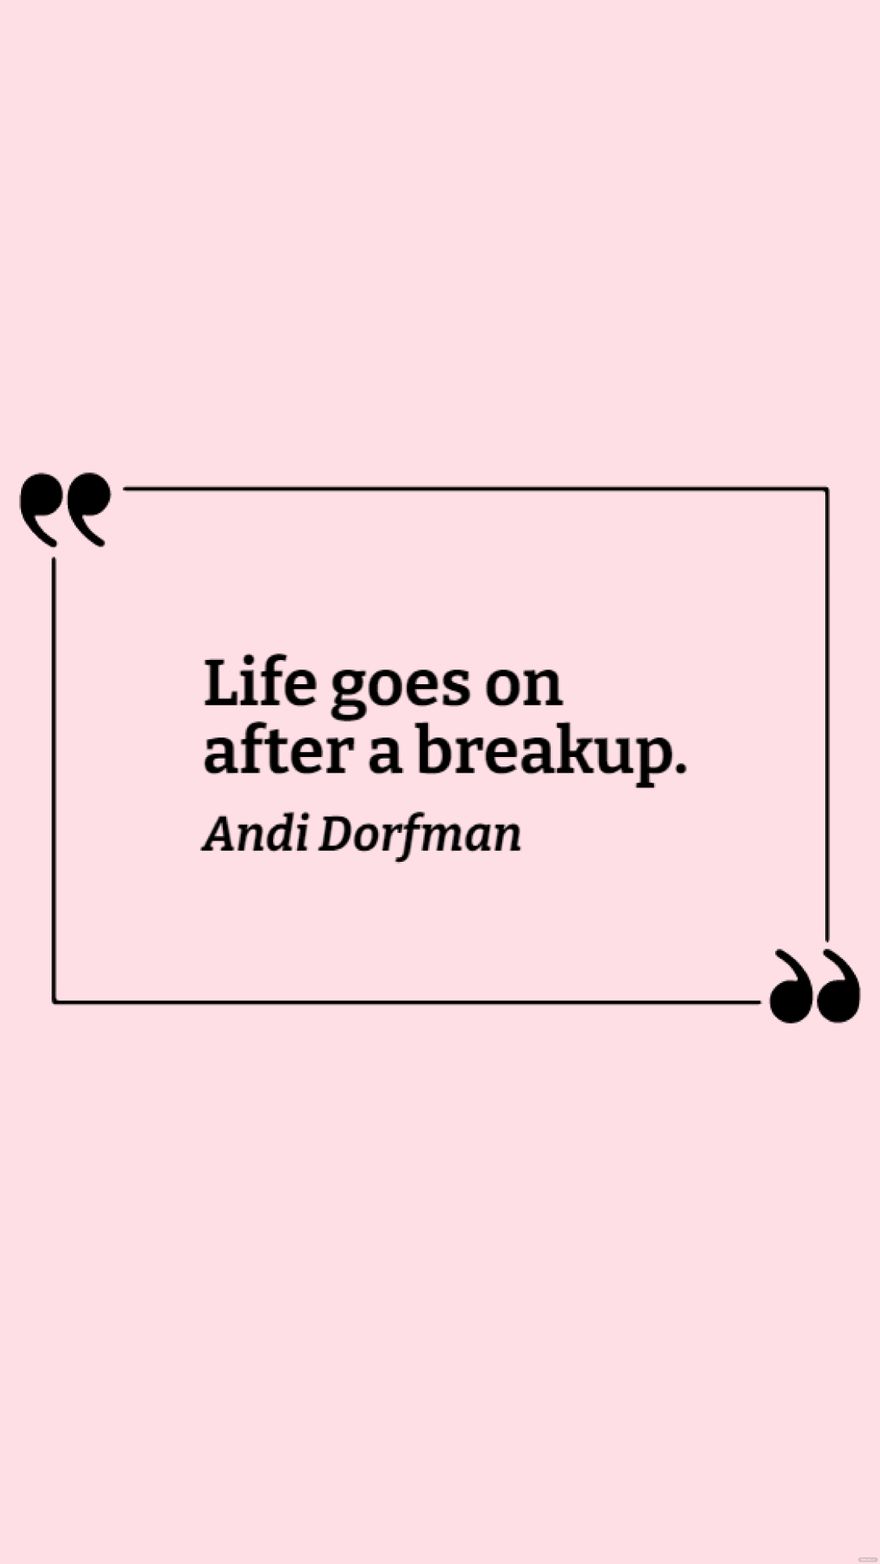 Free Andi Dorfman - Life goes on after a breakup. in JPG